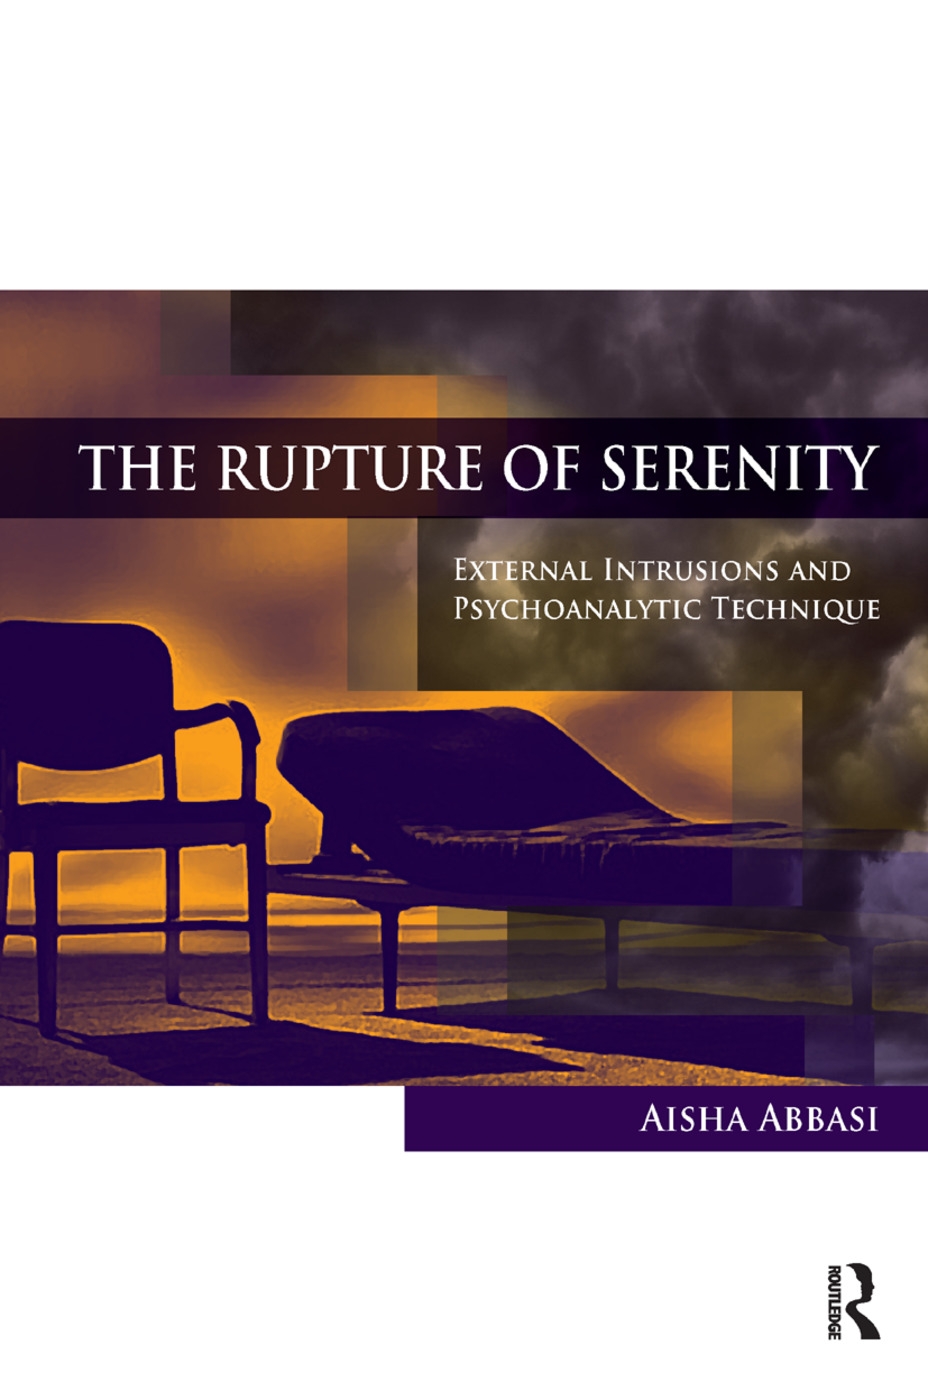 The Rupture of Serenity: External Intrusions and Psychoanalytic Technique